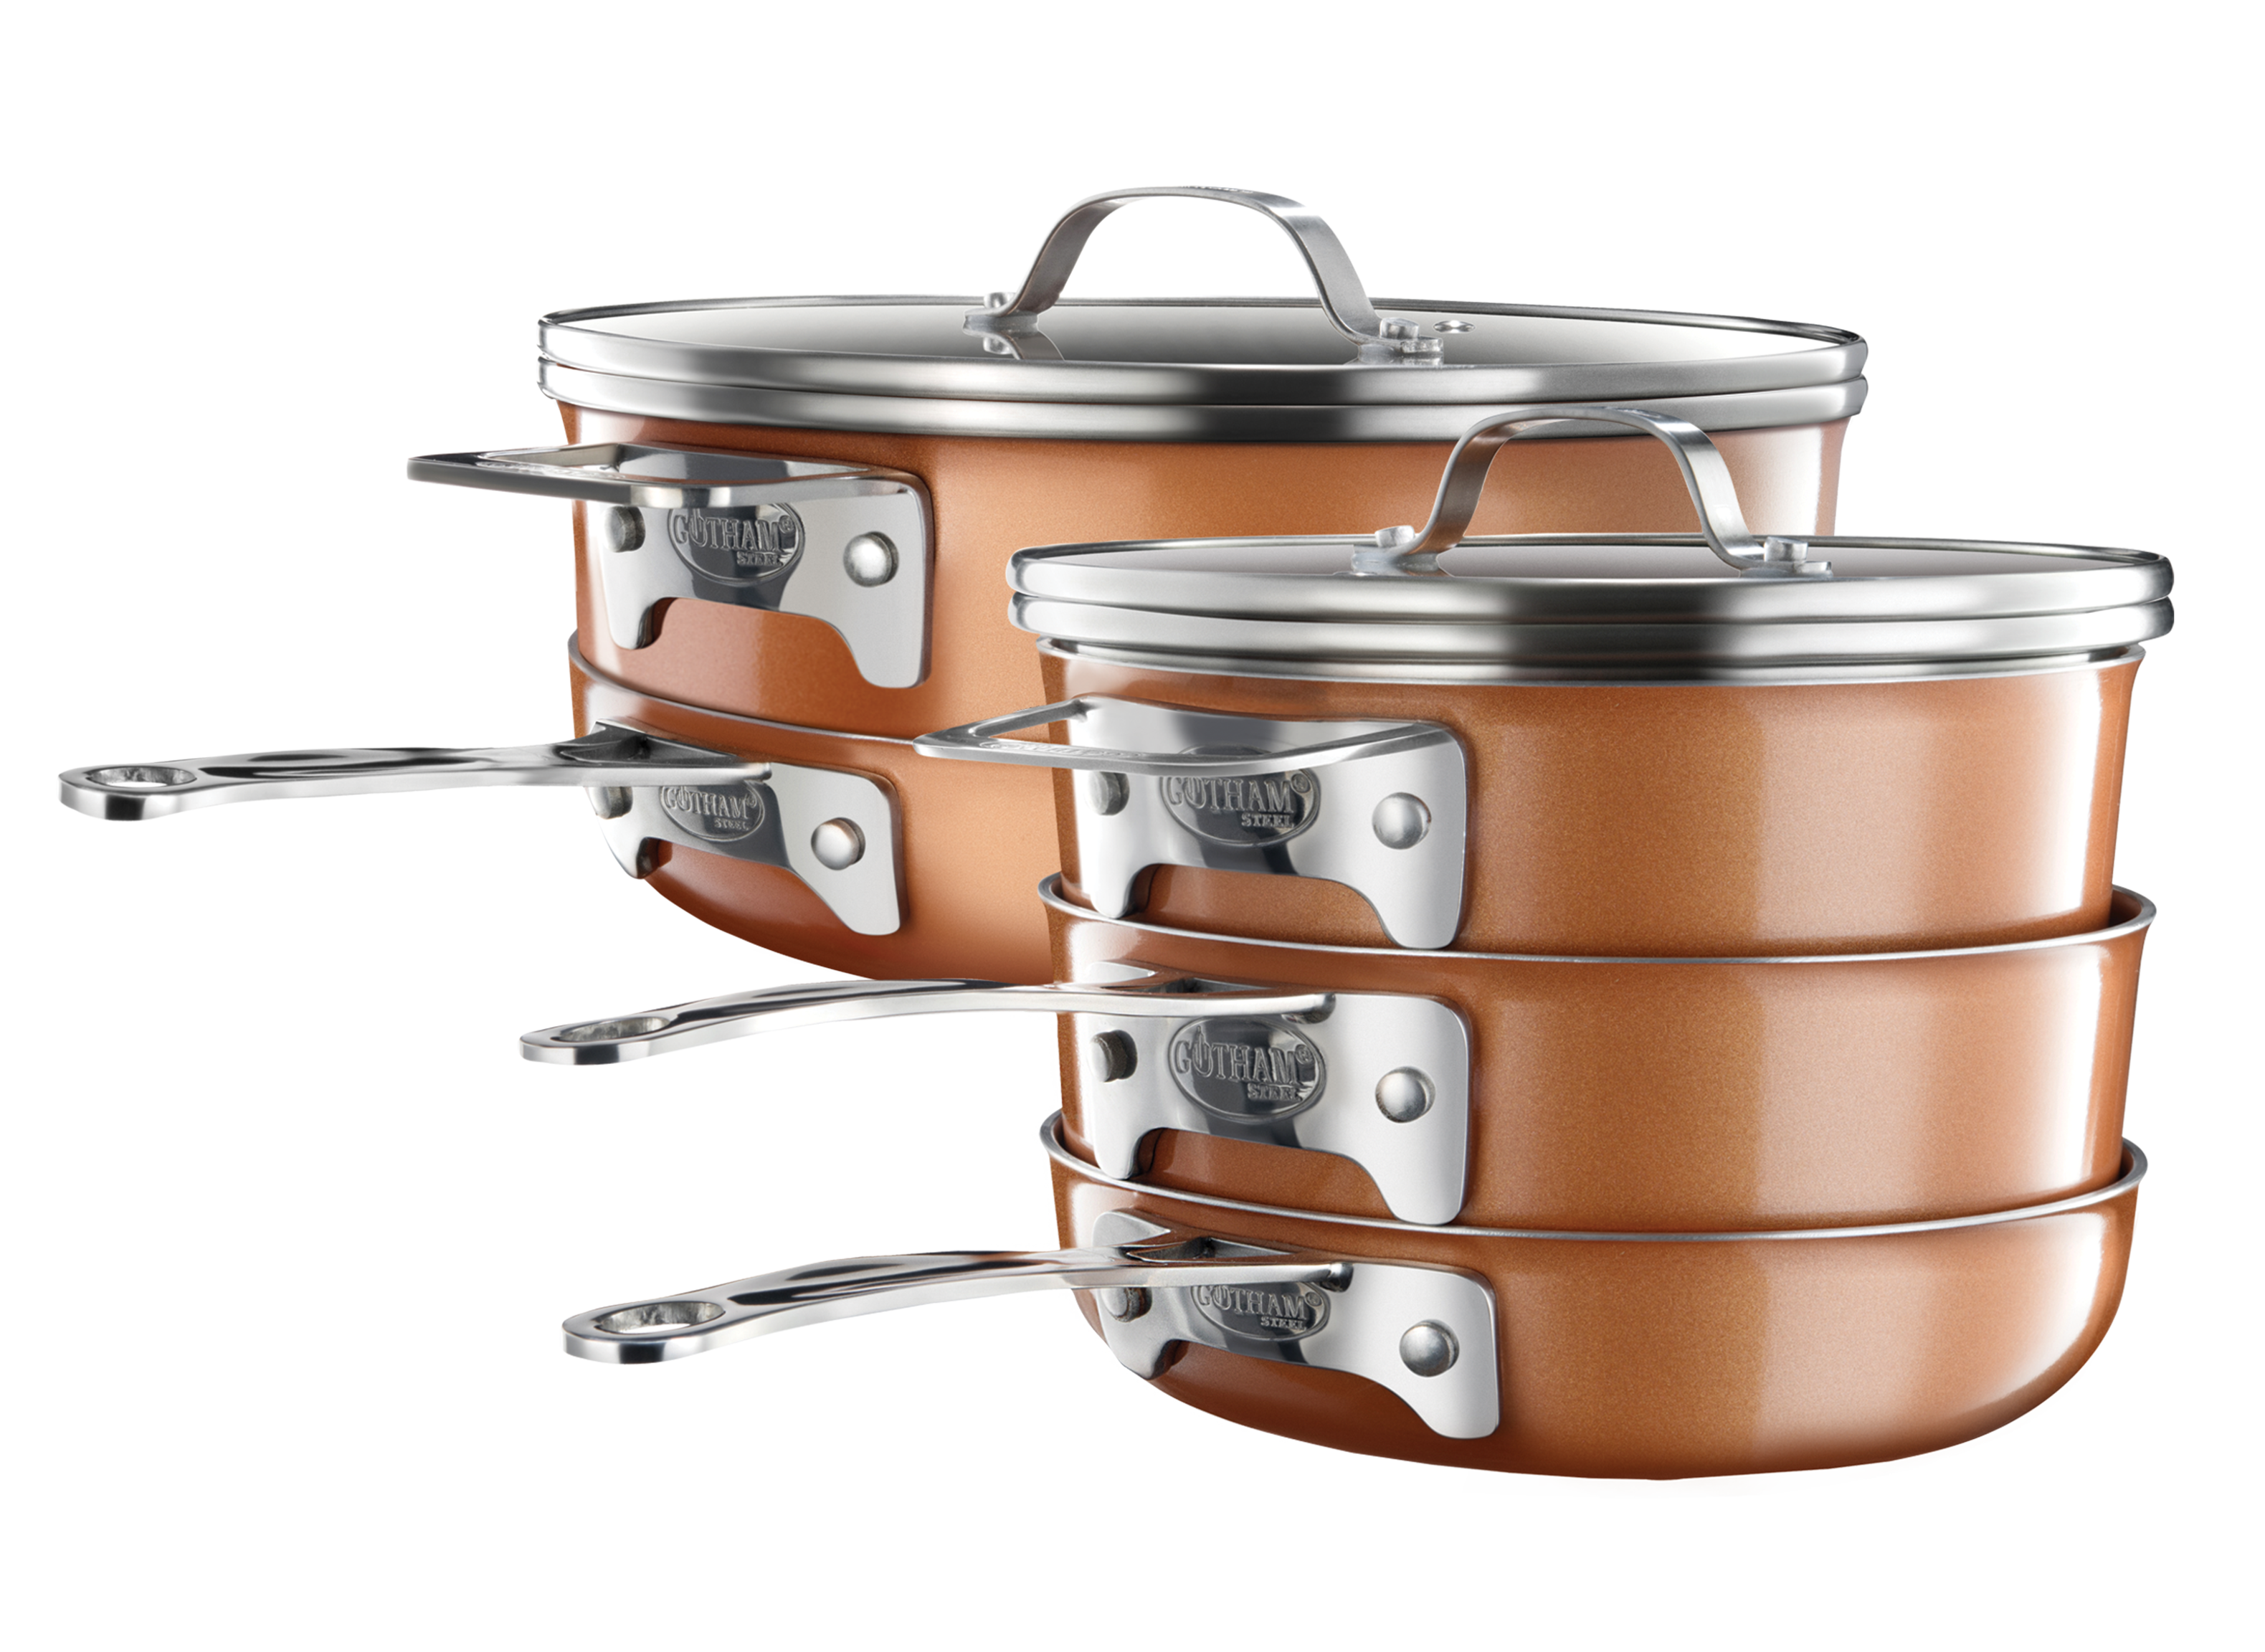 https://crdms.images.consumerreports.org/prod/products/cr/models/402092-cookware-sets-nonstick-gotham-steel-stackmaster-10015981.png